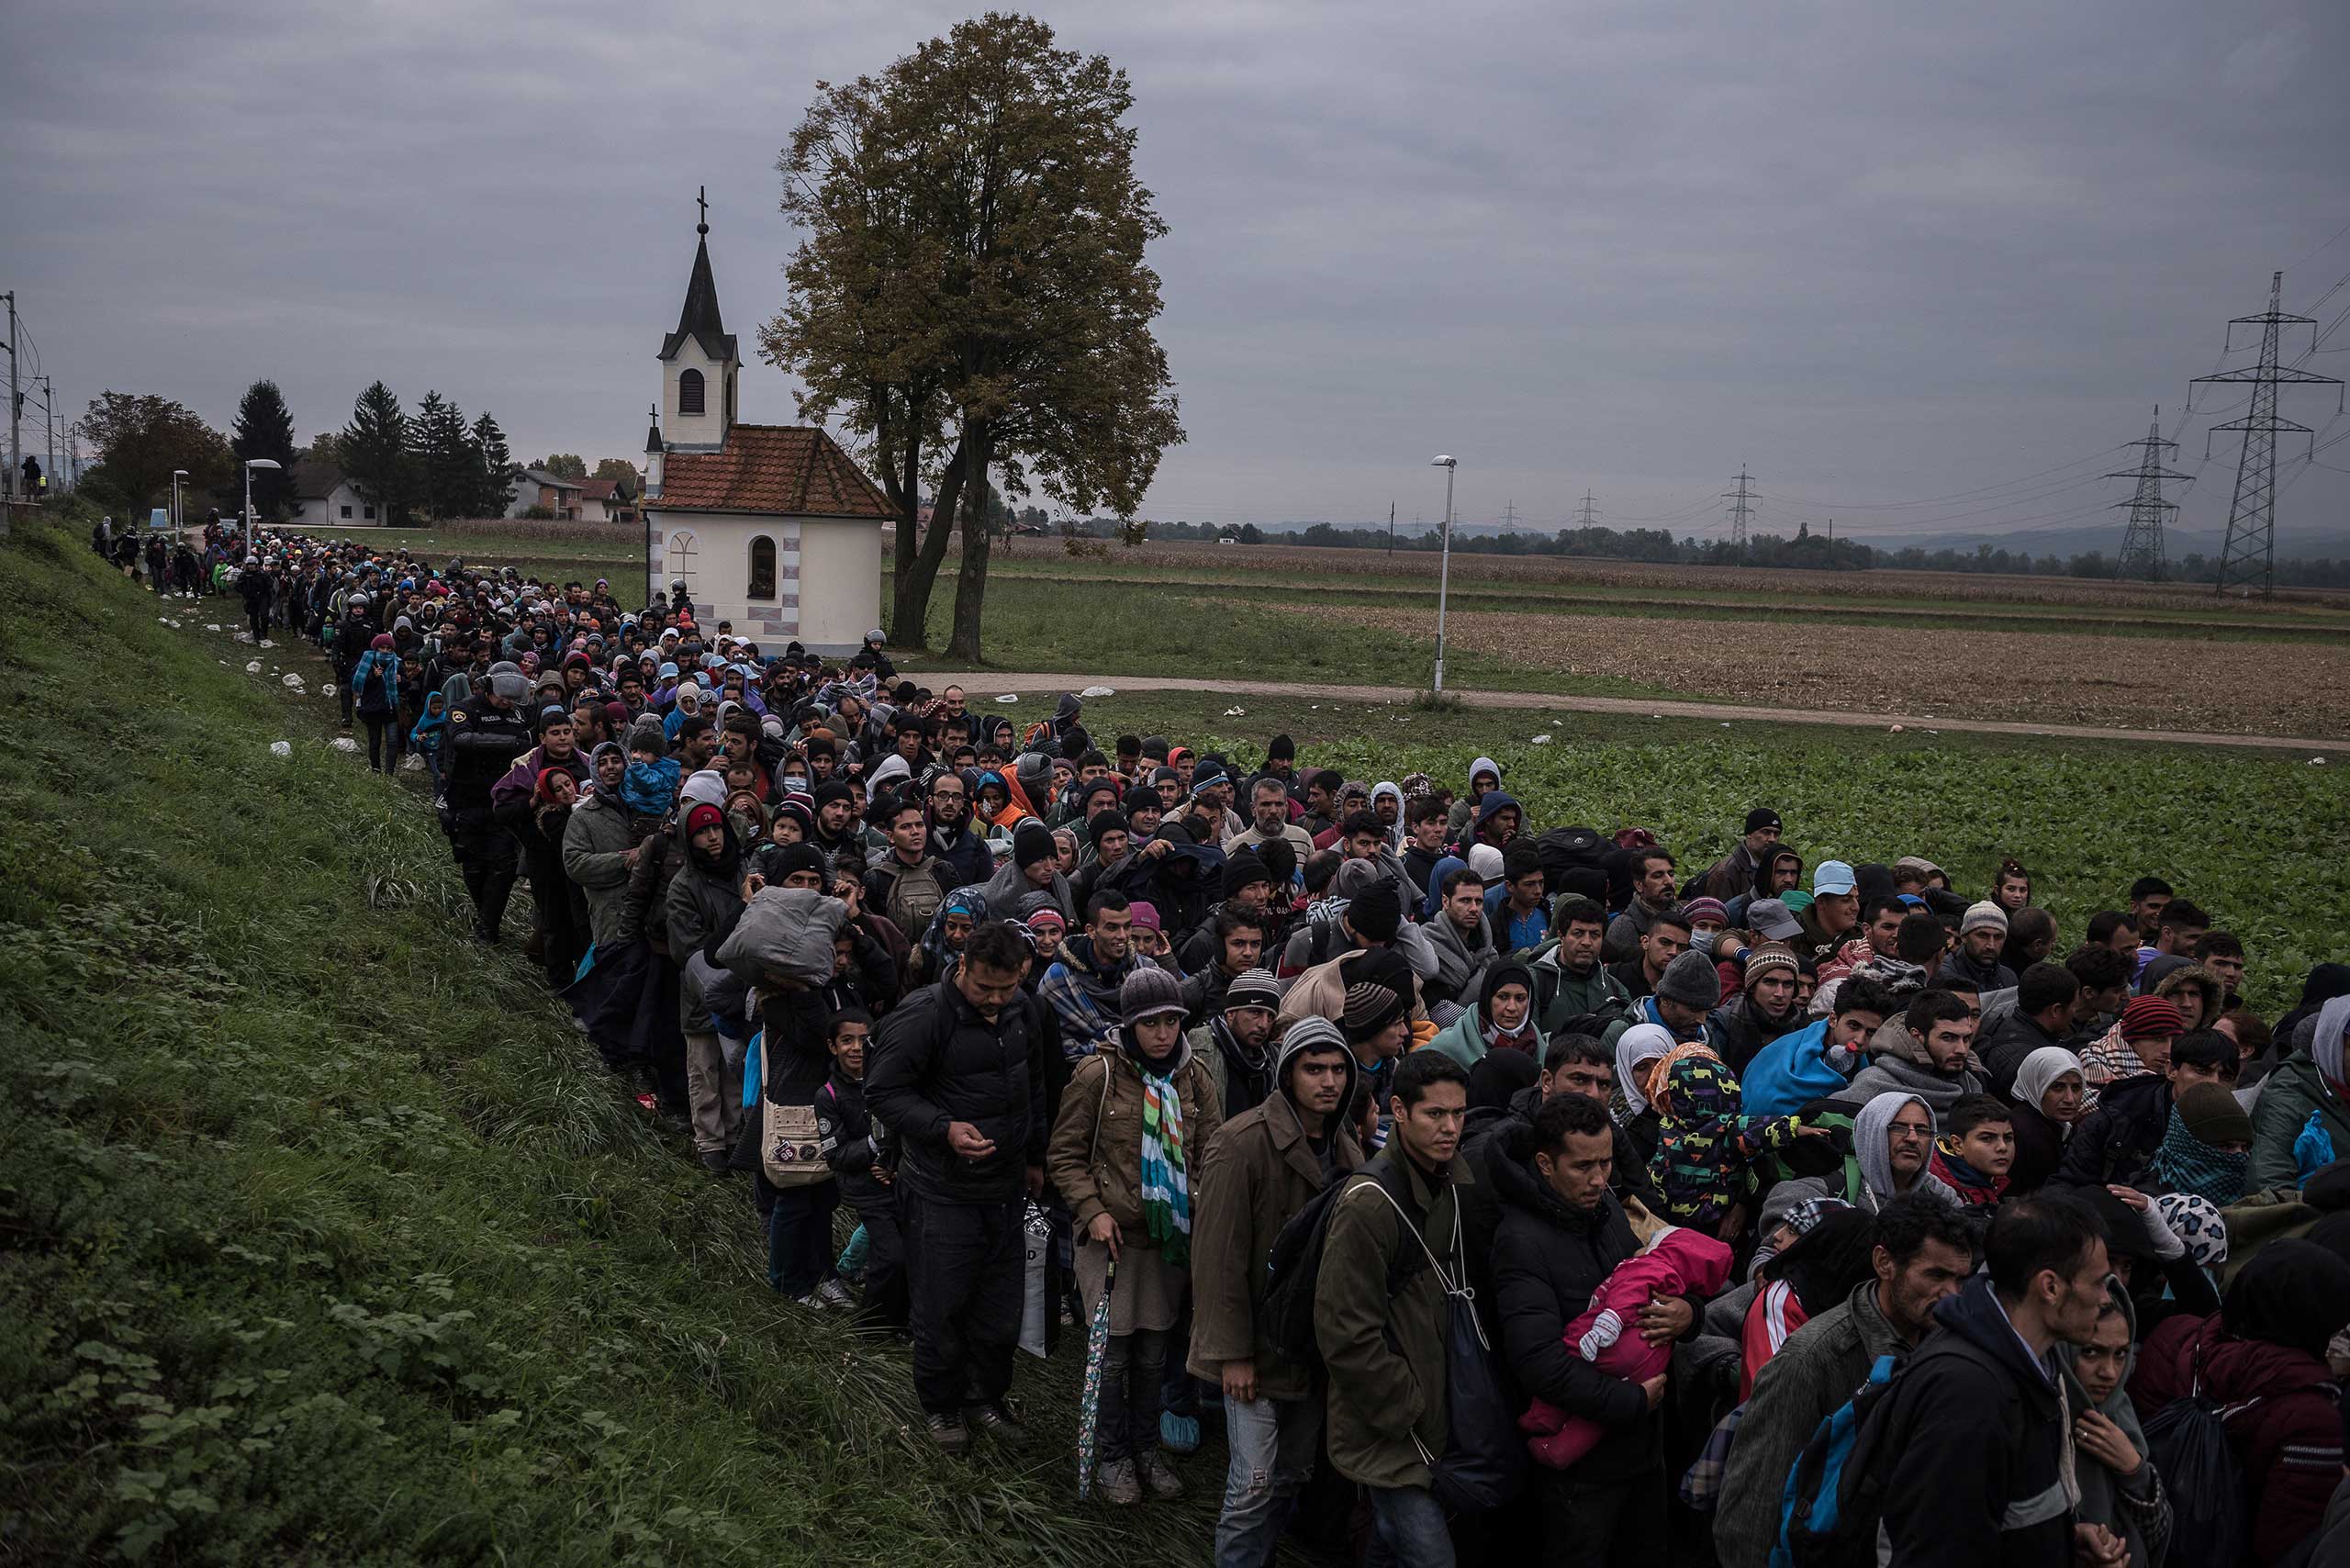 Migrants walking past a church, escorted by Slovenian riot police to a registration camp outside Dobova, Slovenia. Oct. 22, 2015.